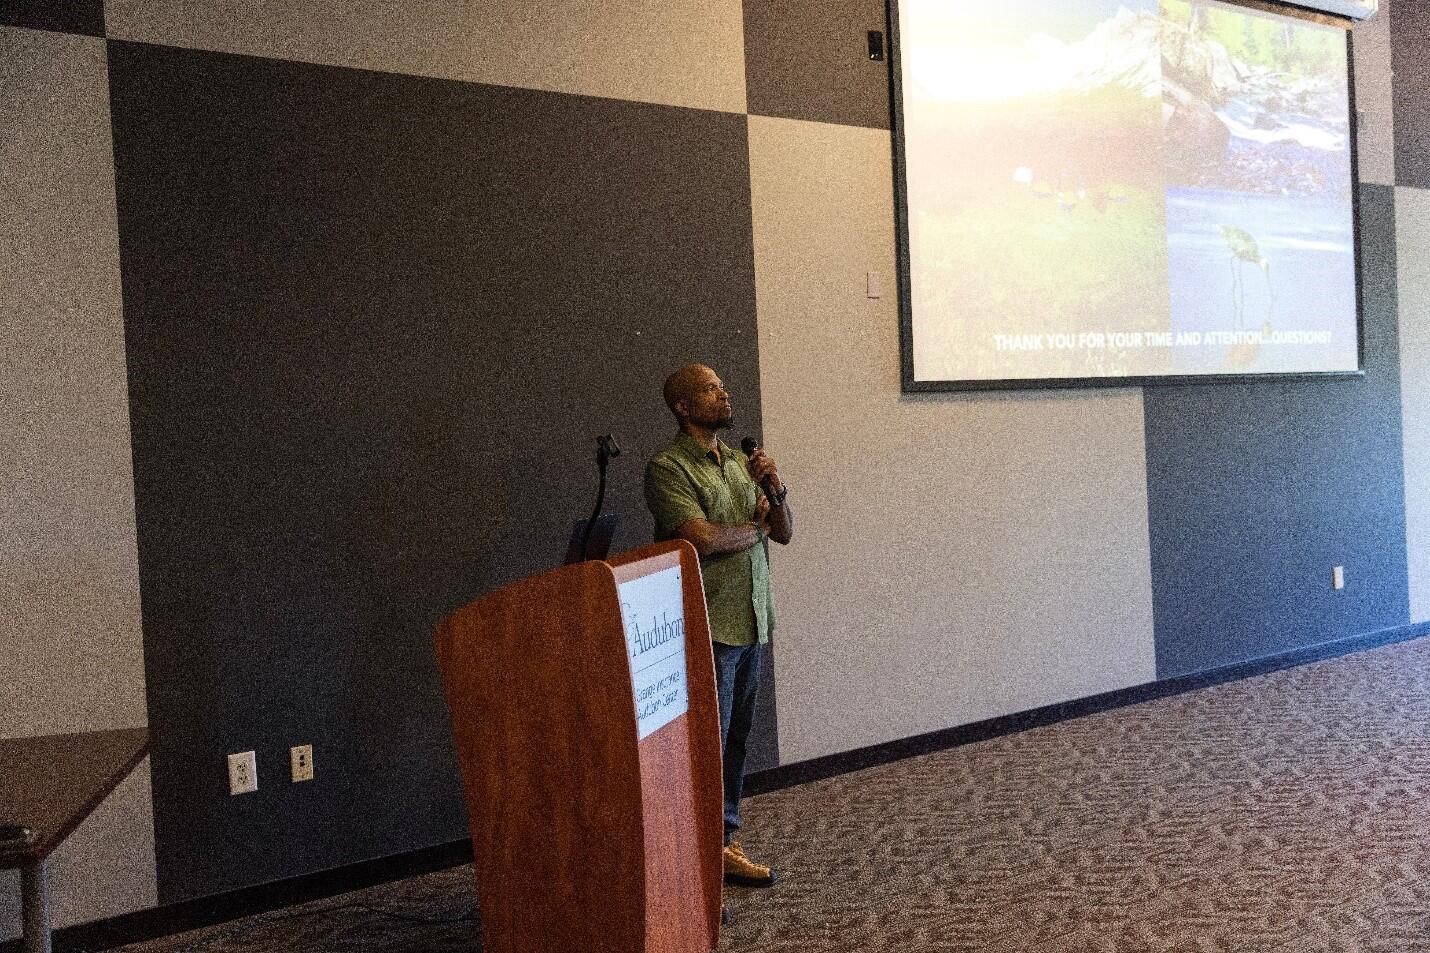 Dudley Edmondson, Author of “Black & Brown Faces in America’s Wild Places,” a book that highlights people of color’s experiences with the outdoors in hopes to inspire others, hosted a presentation at the Grange Insurance Audubon Center.